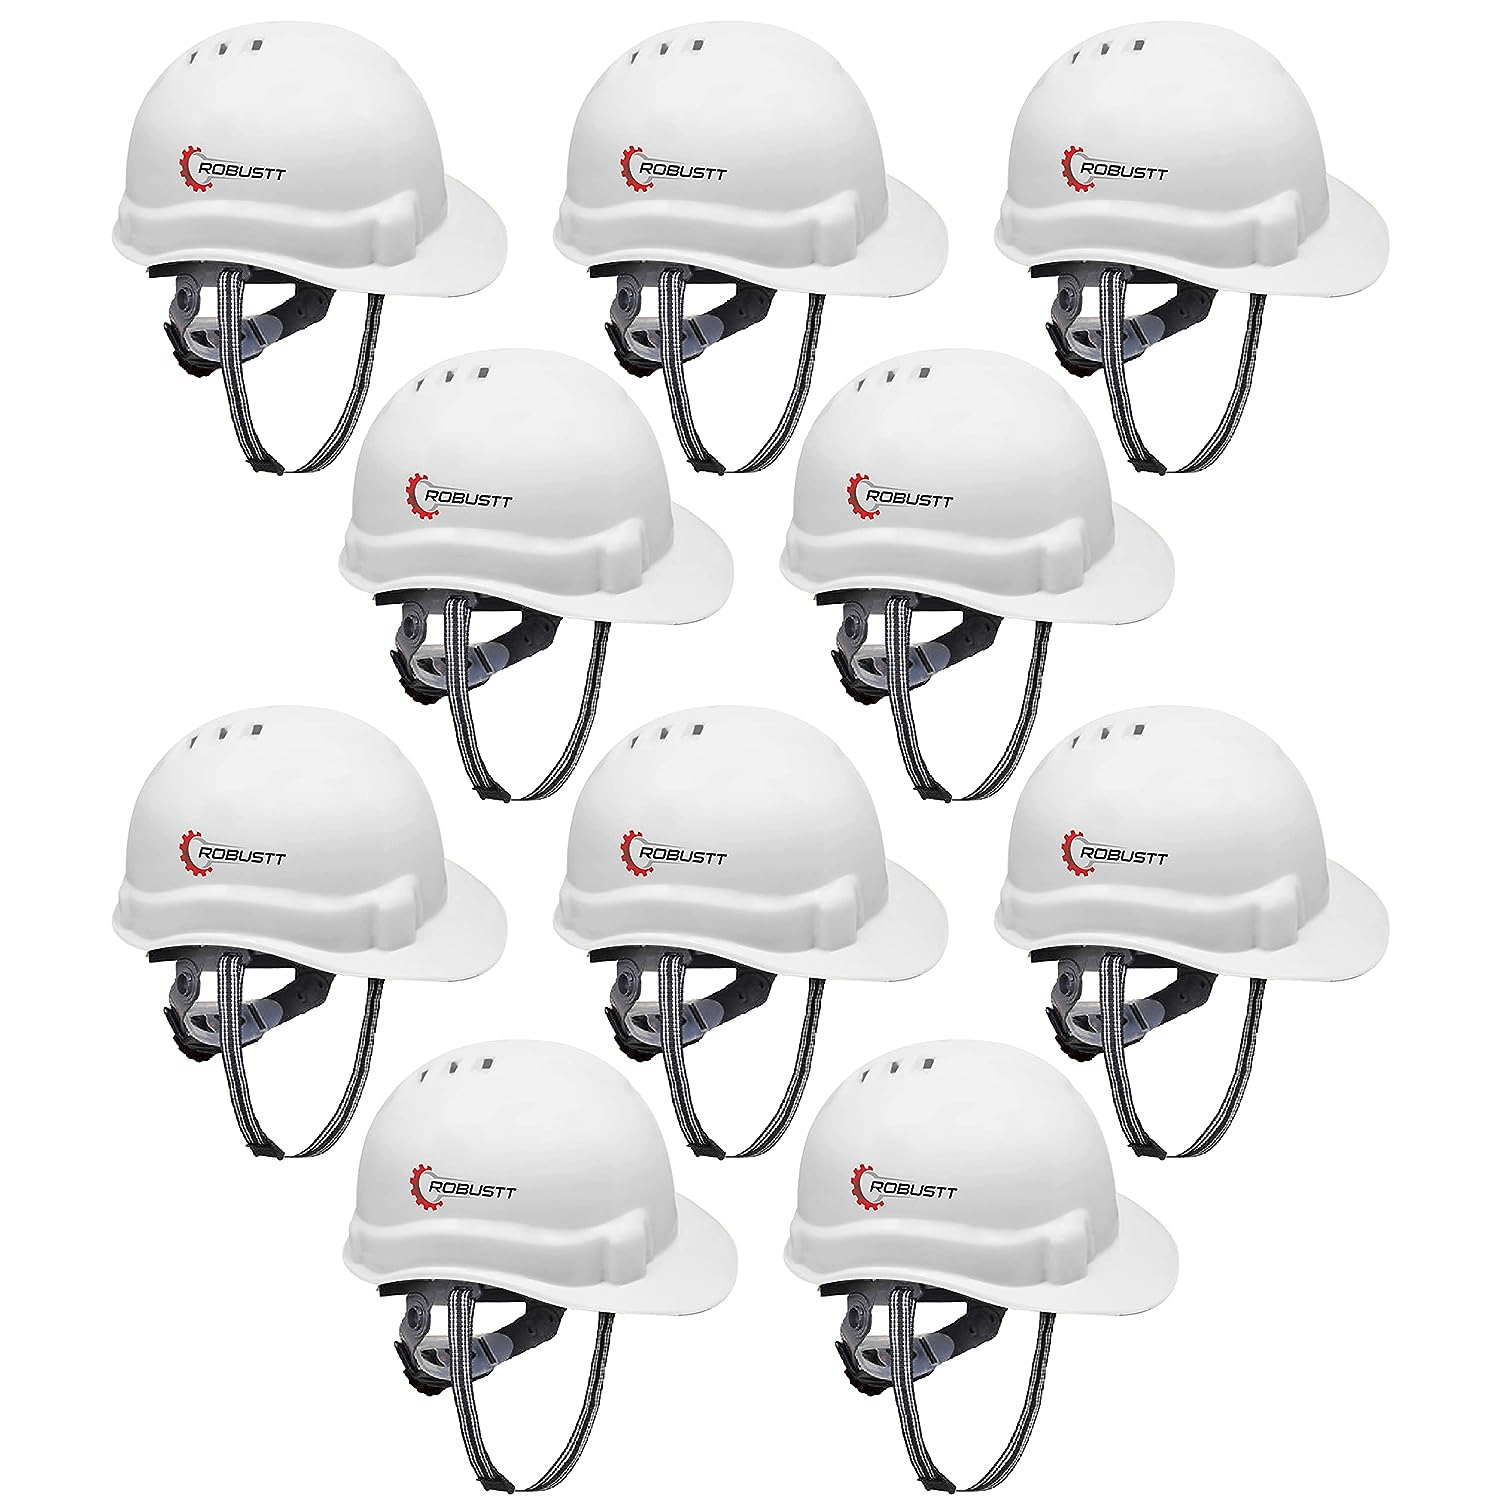 robustt-x-shree-jee-safety-helmet-executive-ratchet-type-adjustment-protection-for-outdoor-work-head-safety-hat-with-sweat-band-white-pack-of-10